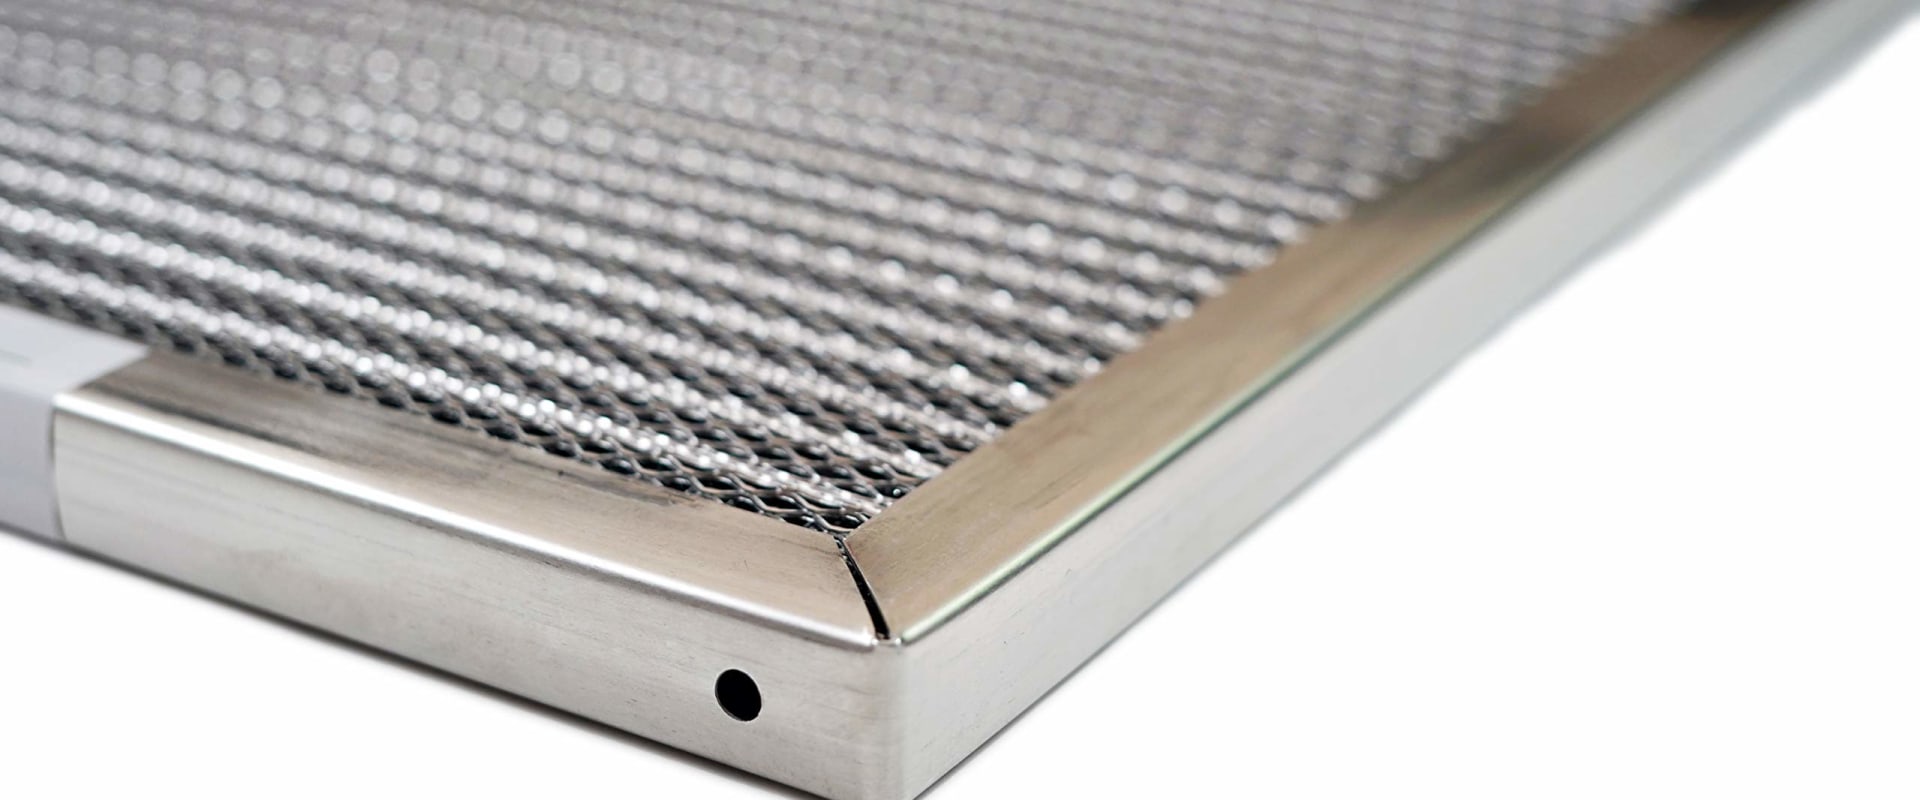 Upgrade Your HVAC System to 10x20x1 HVAC Furnace Air Filters